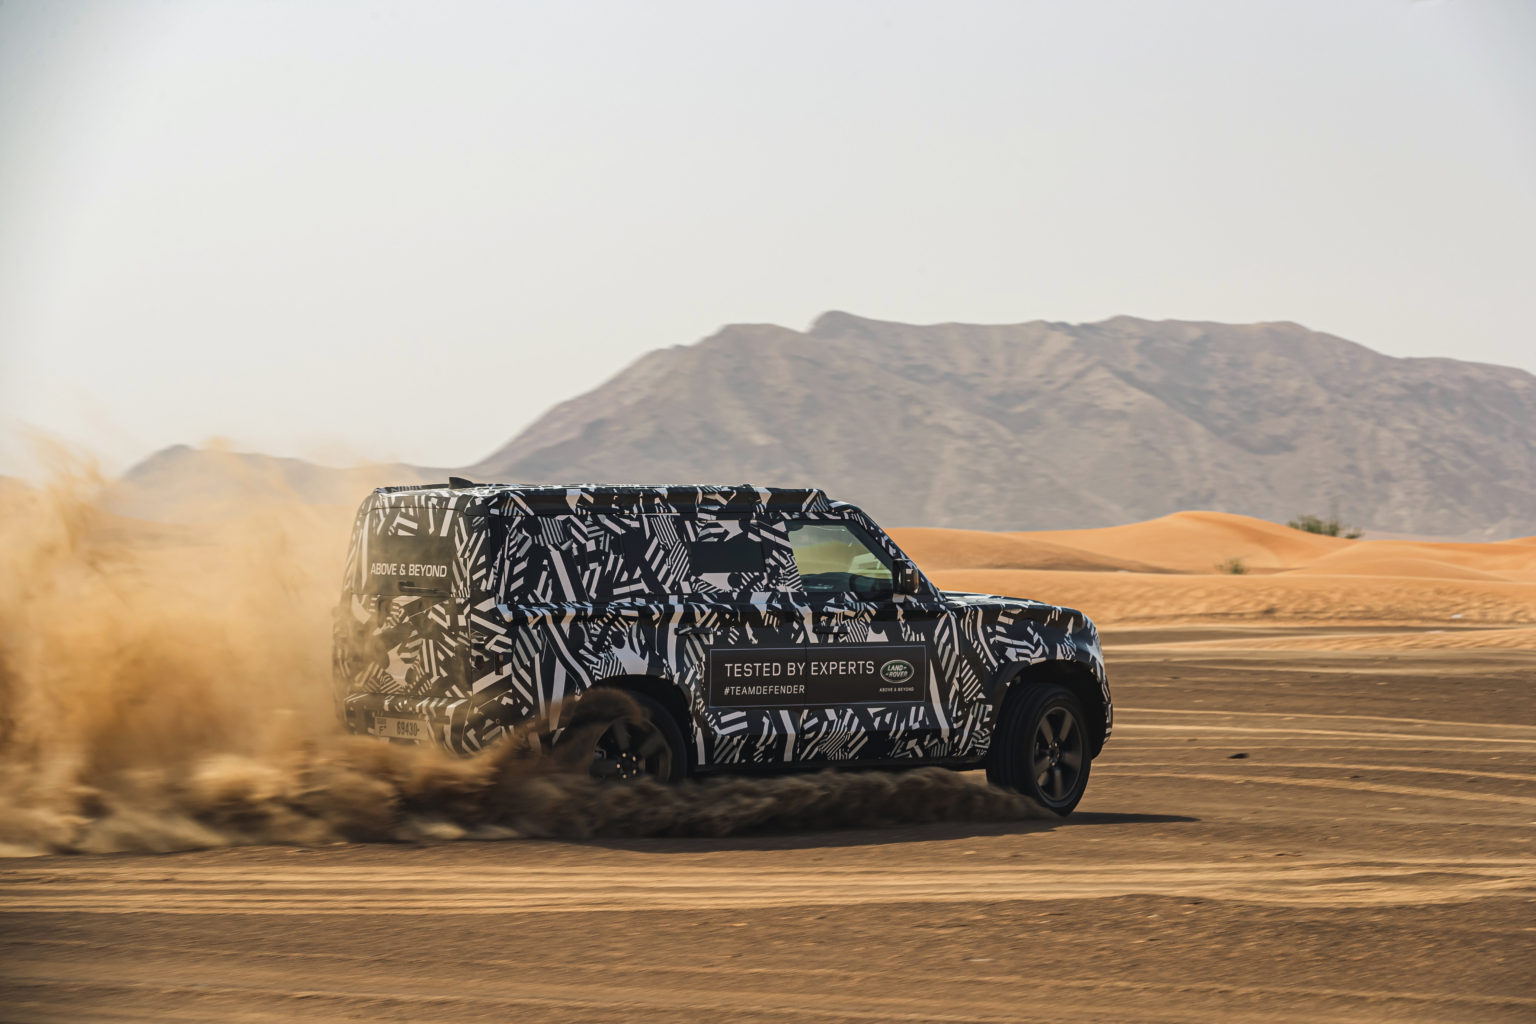 Land Rover enlisted the help of the Red Cross to test the 2020 Land Rover Defender.